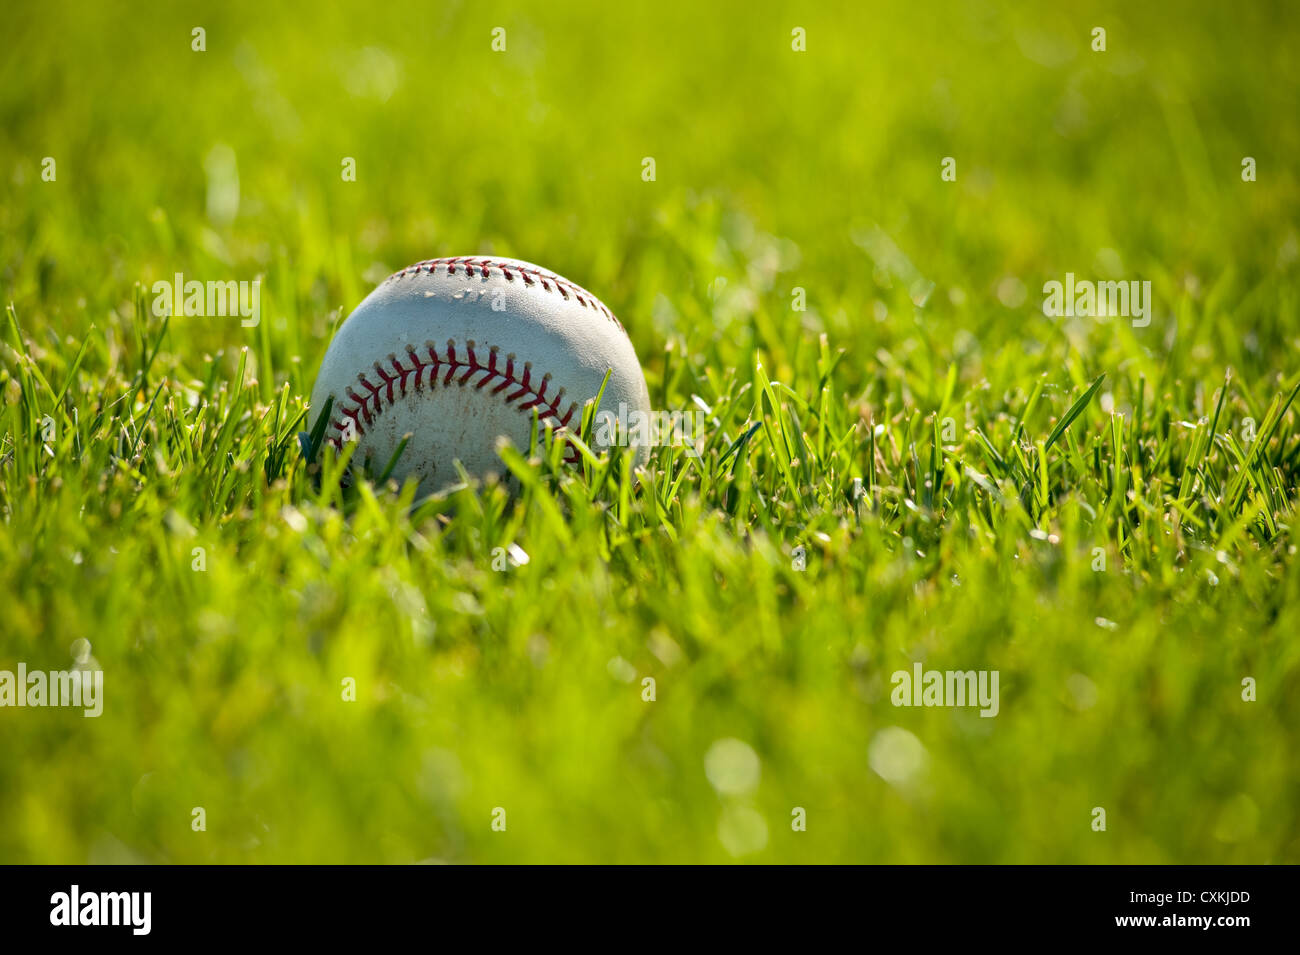 A white leather baseball on a grass field on a sunny day, with copy space Stock Photo